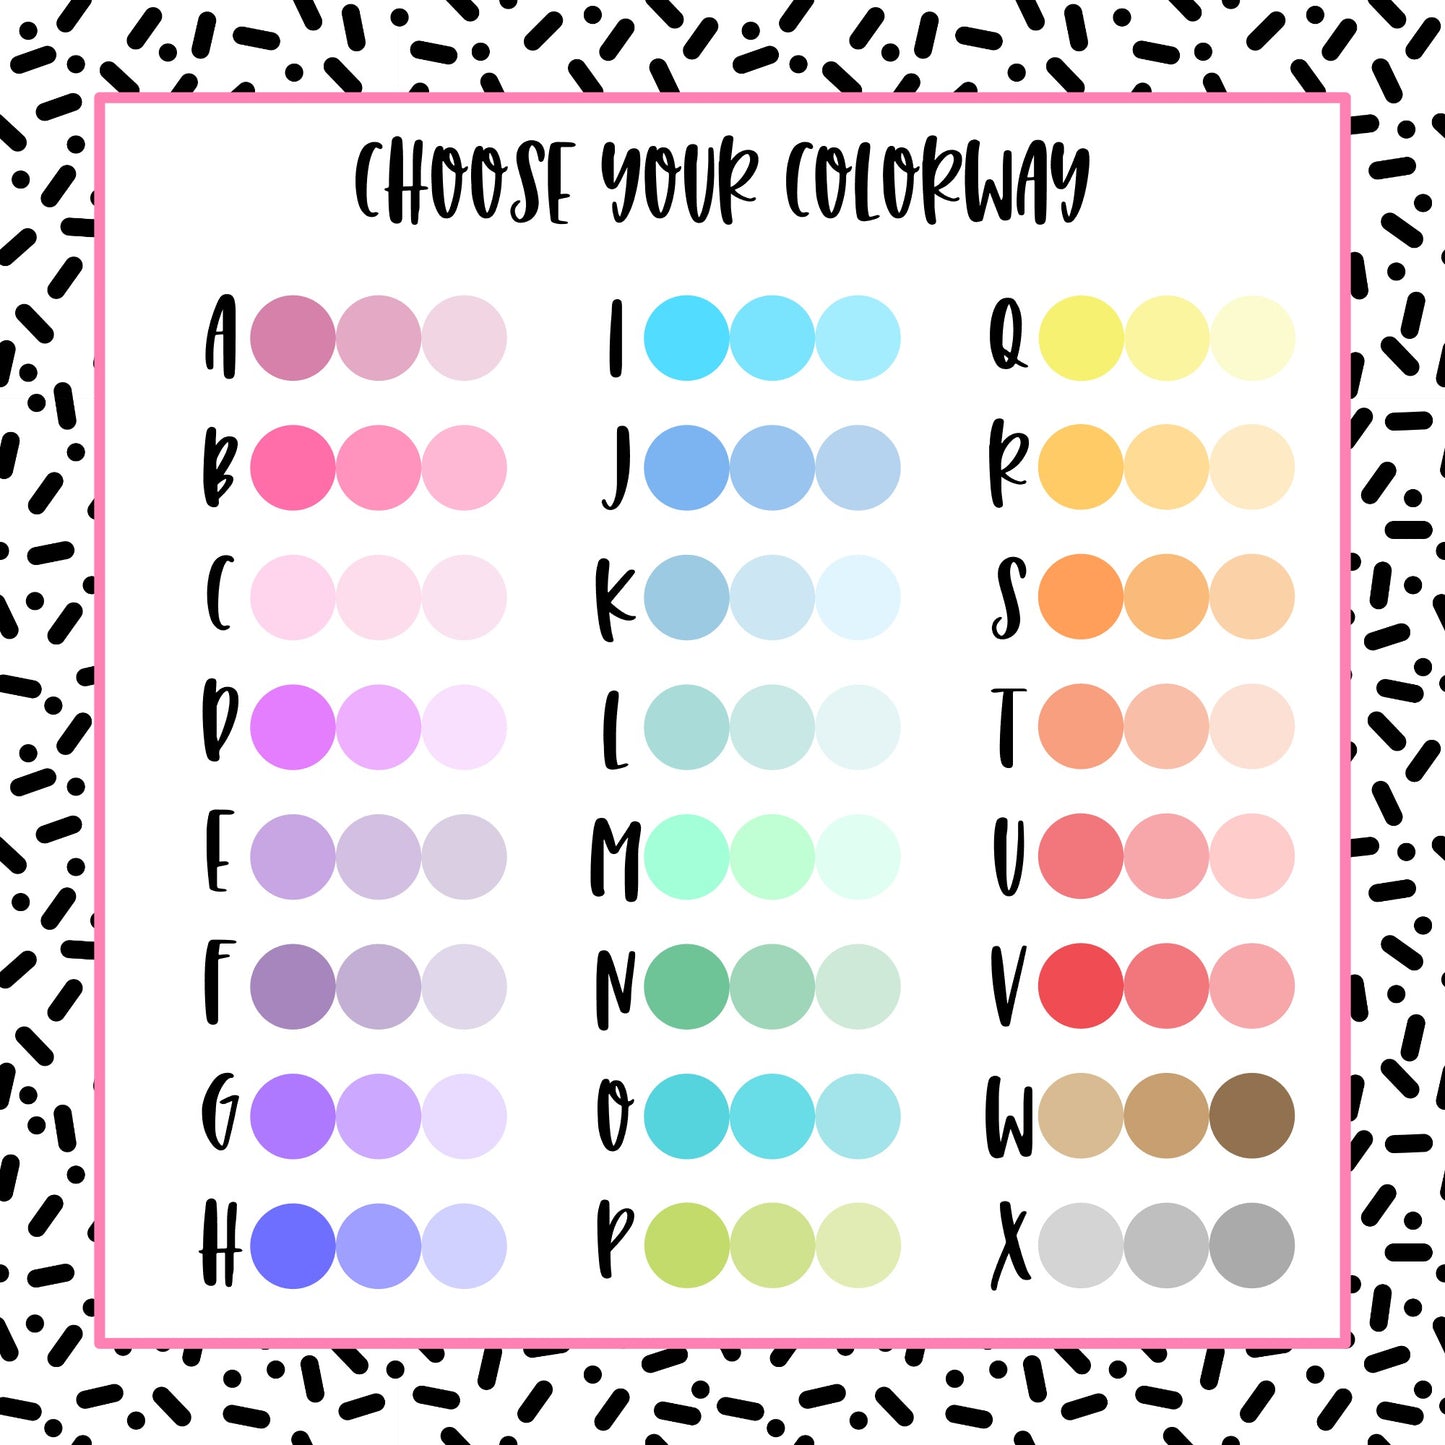 Rounded Fourth Boxes - 24 color options